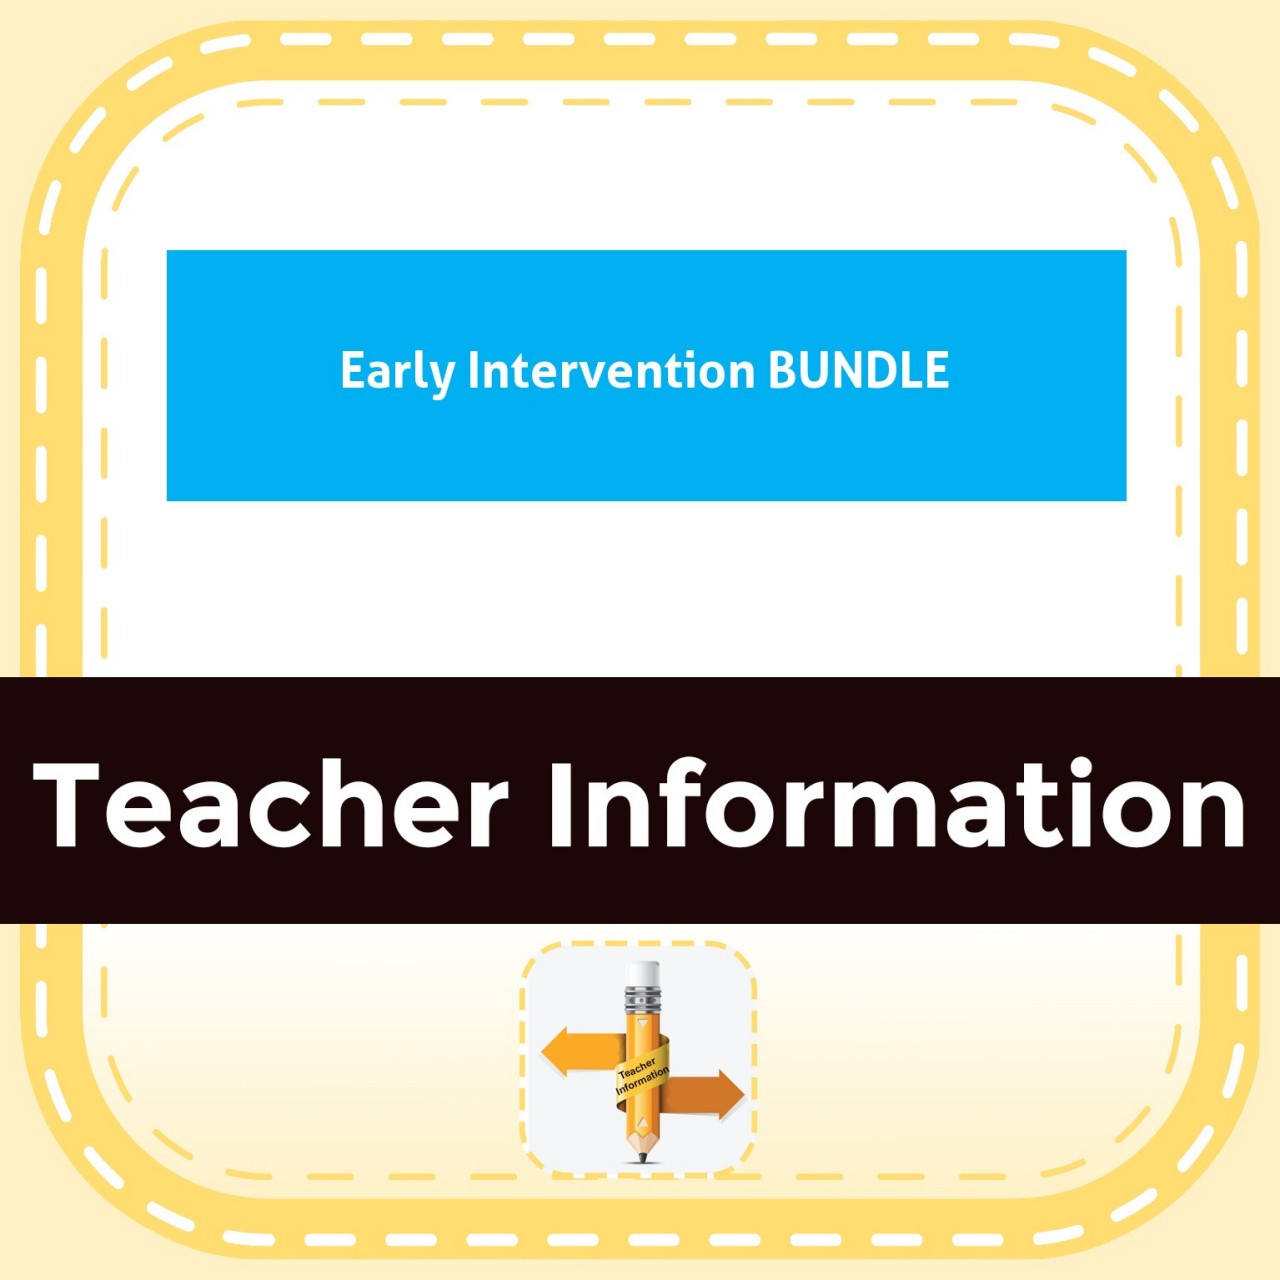 Early Intervention BUNDLE